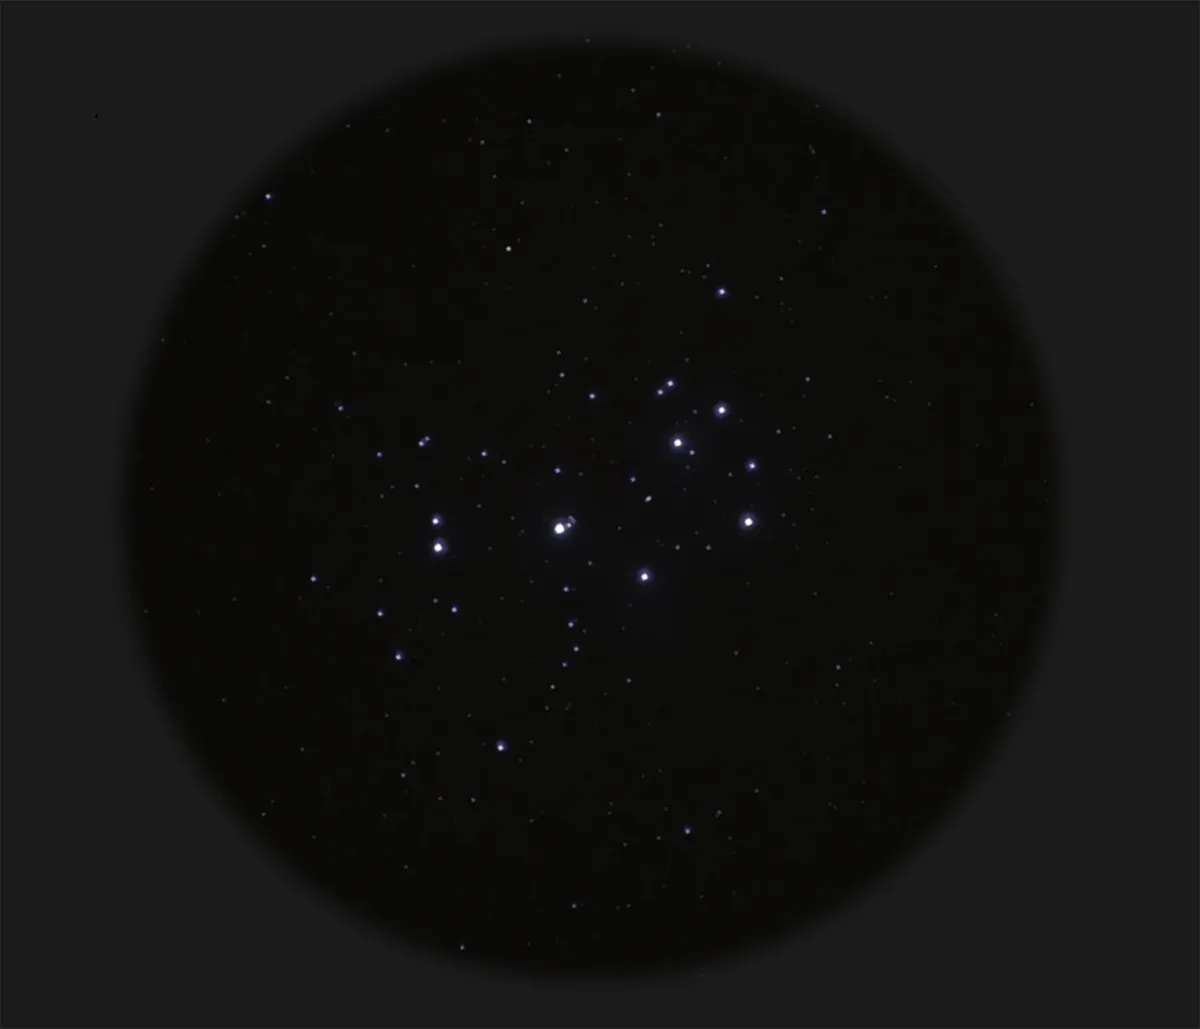 View of the Pleiades through 15x70 binoculars. Credit: Pete Lawrence